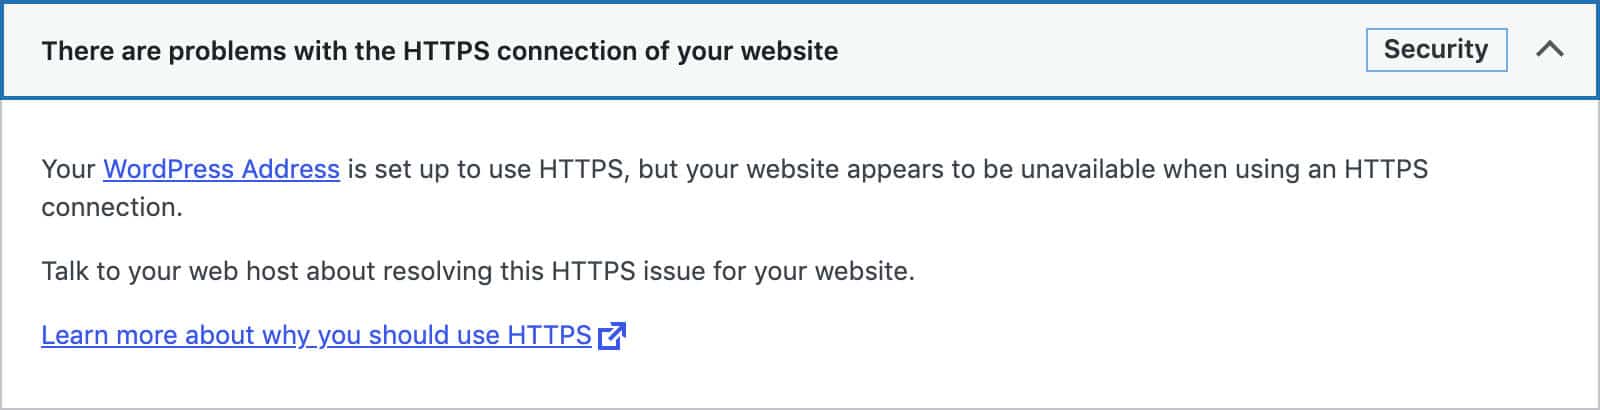 HTTPS is not supported